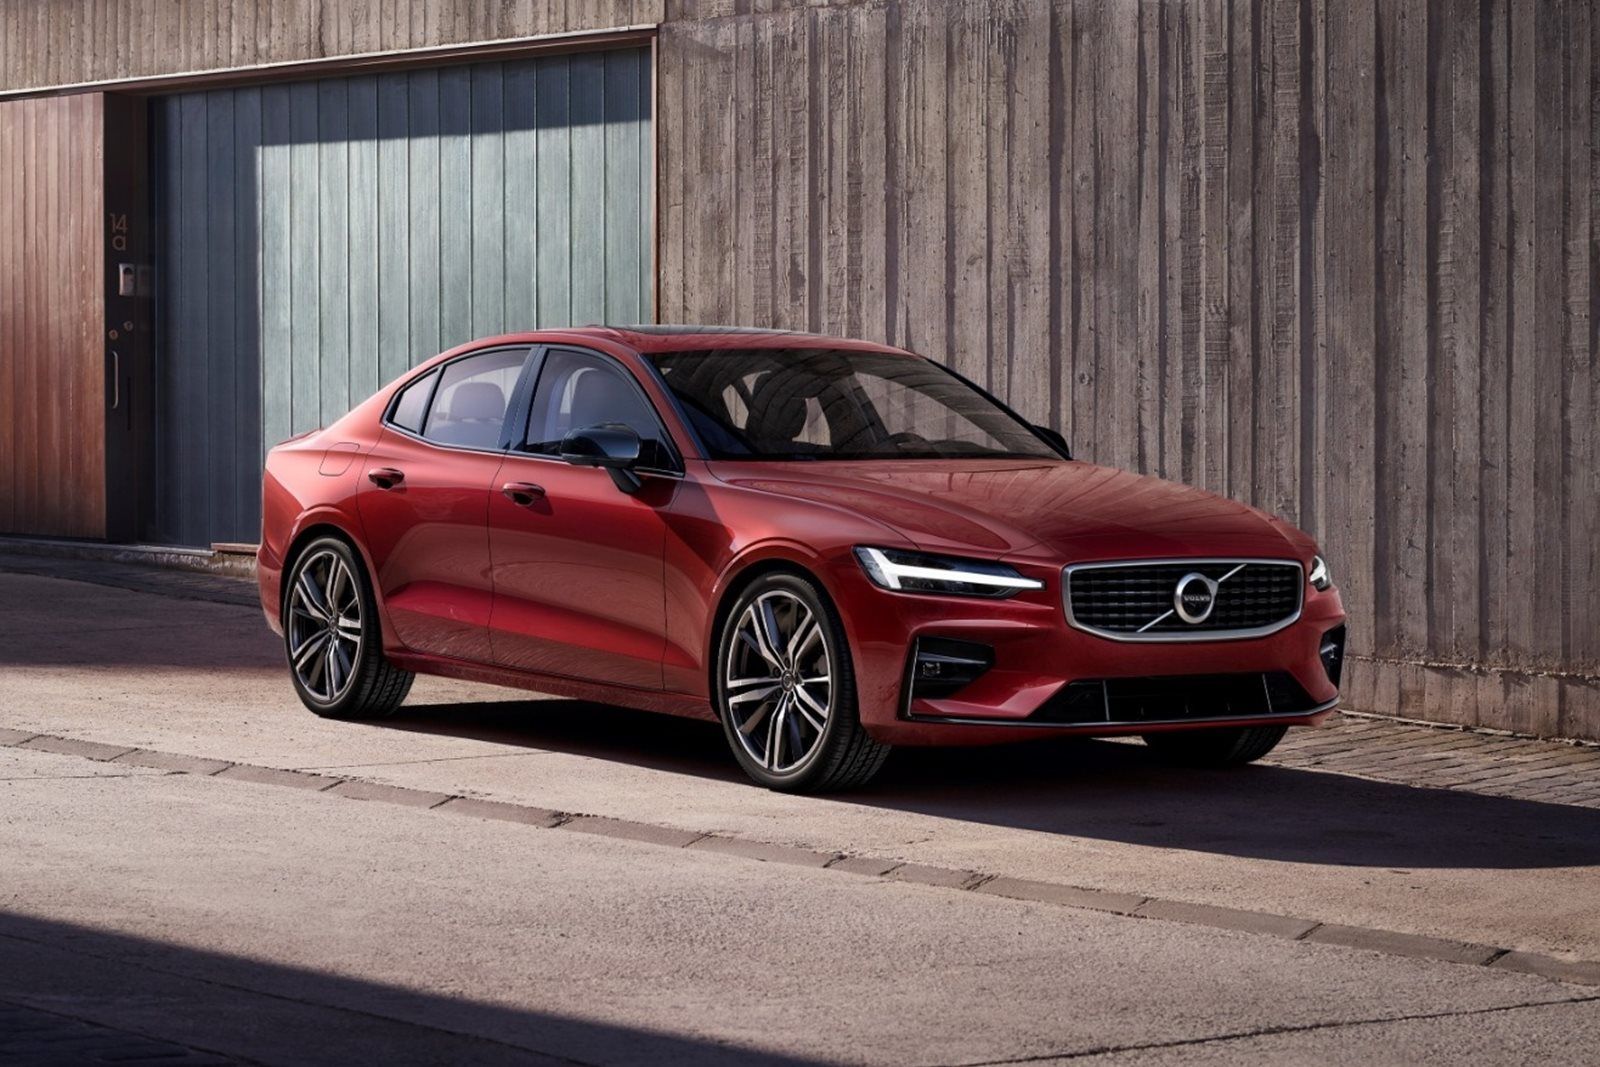 2021 Volvo S60 Launched in India